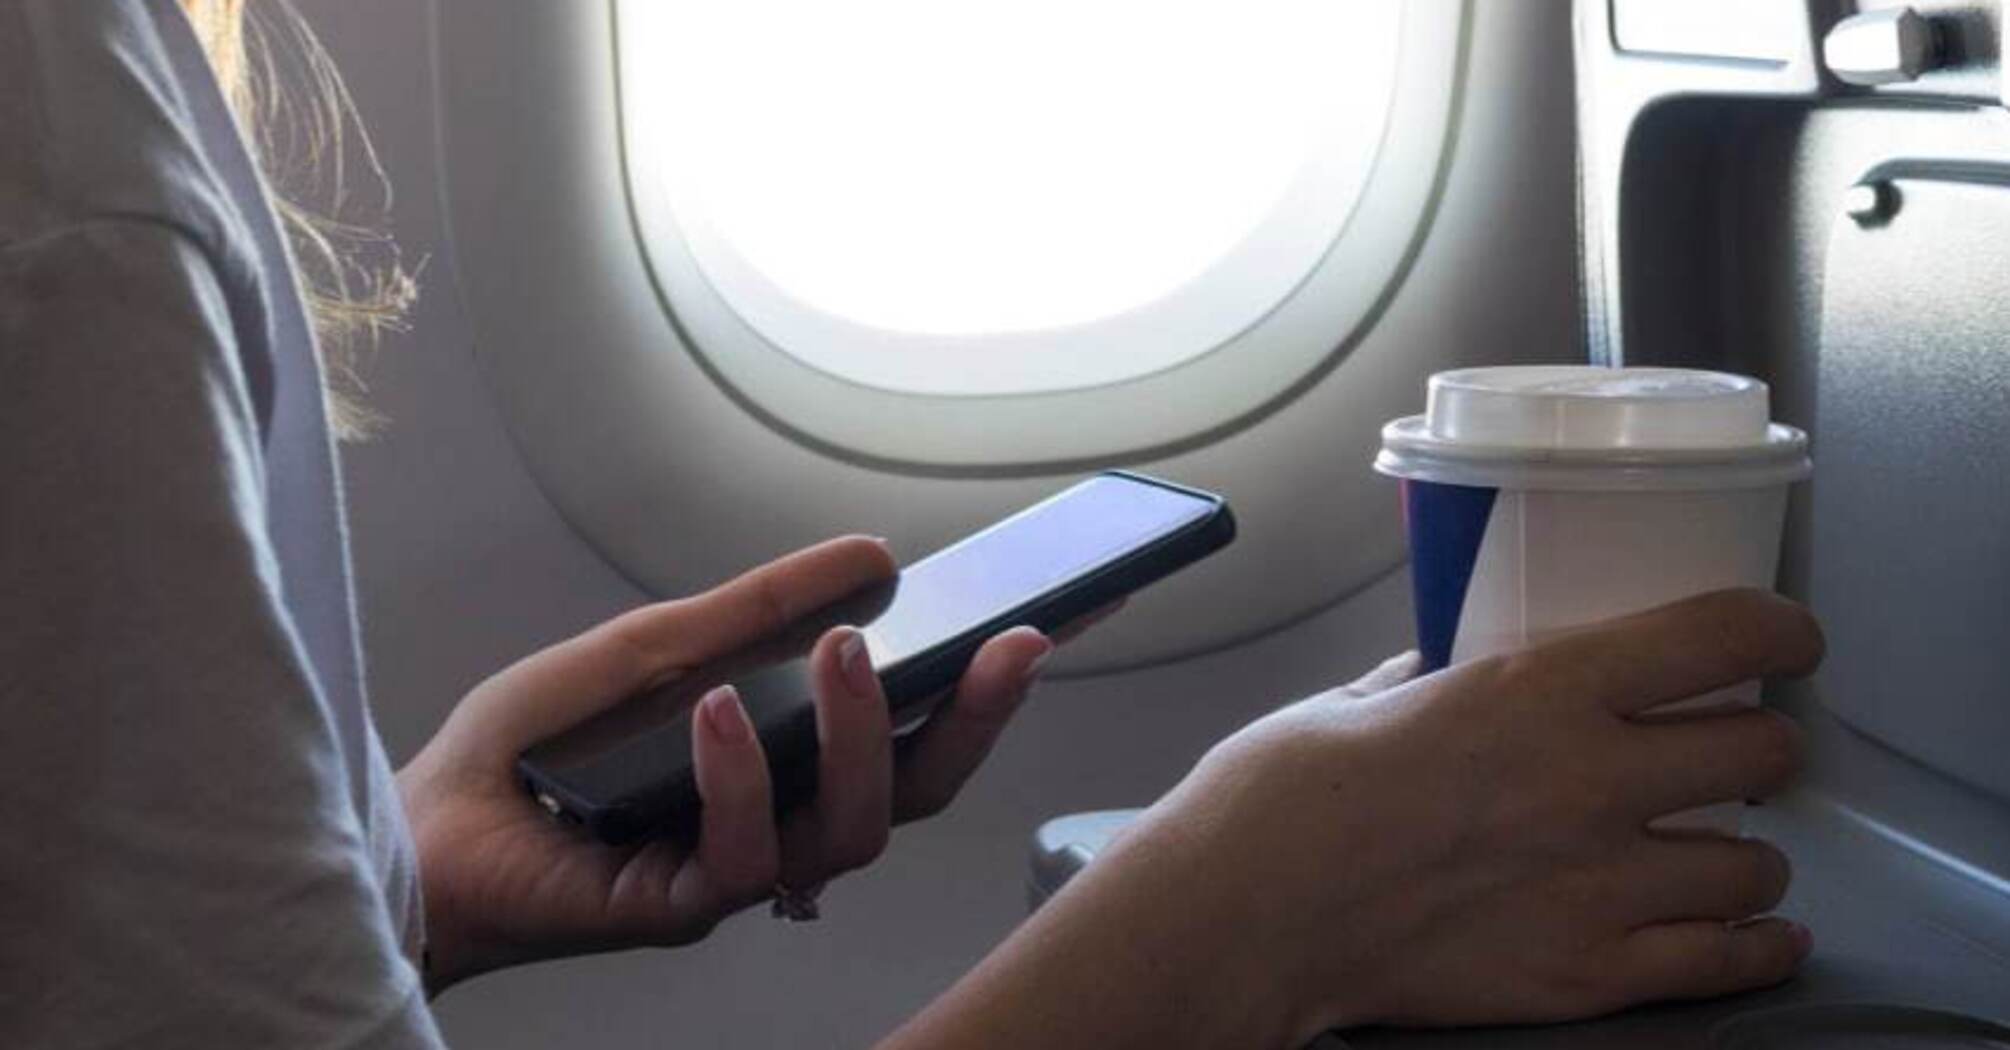 Why it is necessary to switch your phone to airplane mode during flights